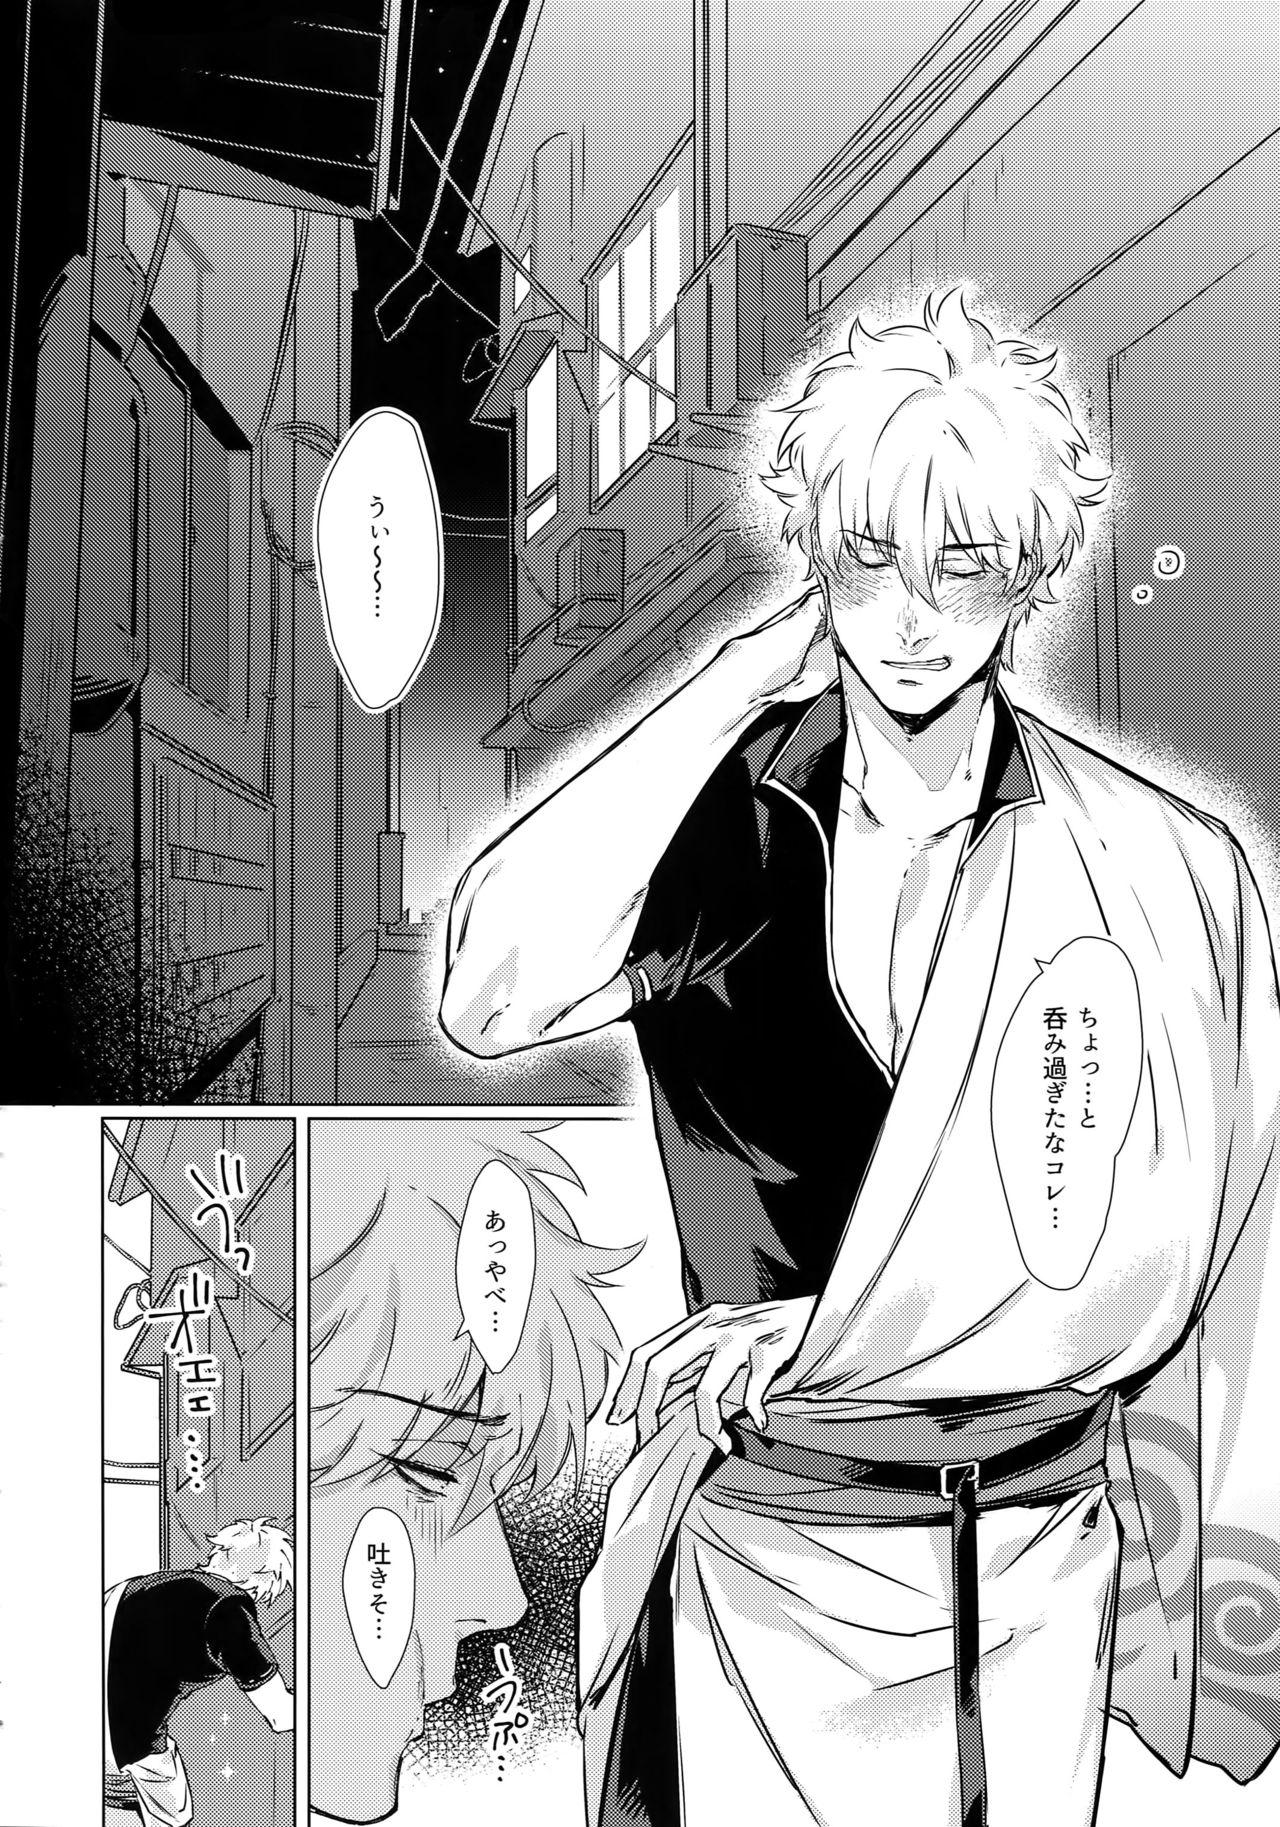 Older Another Edge 1 - Gintama Students - Page 5